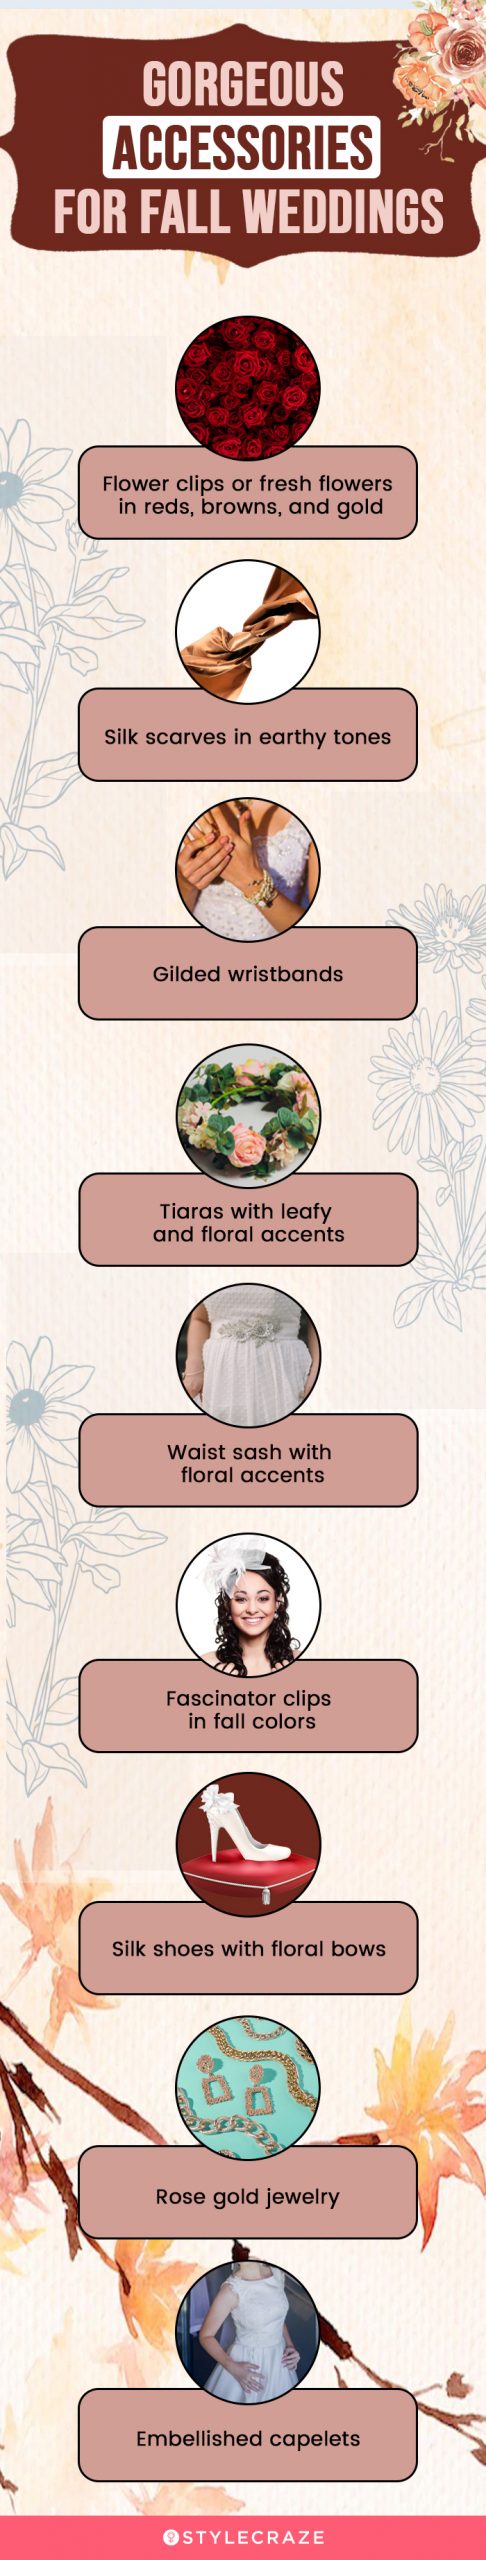 gorgeous accessories for fall weddings (infographic)